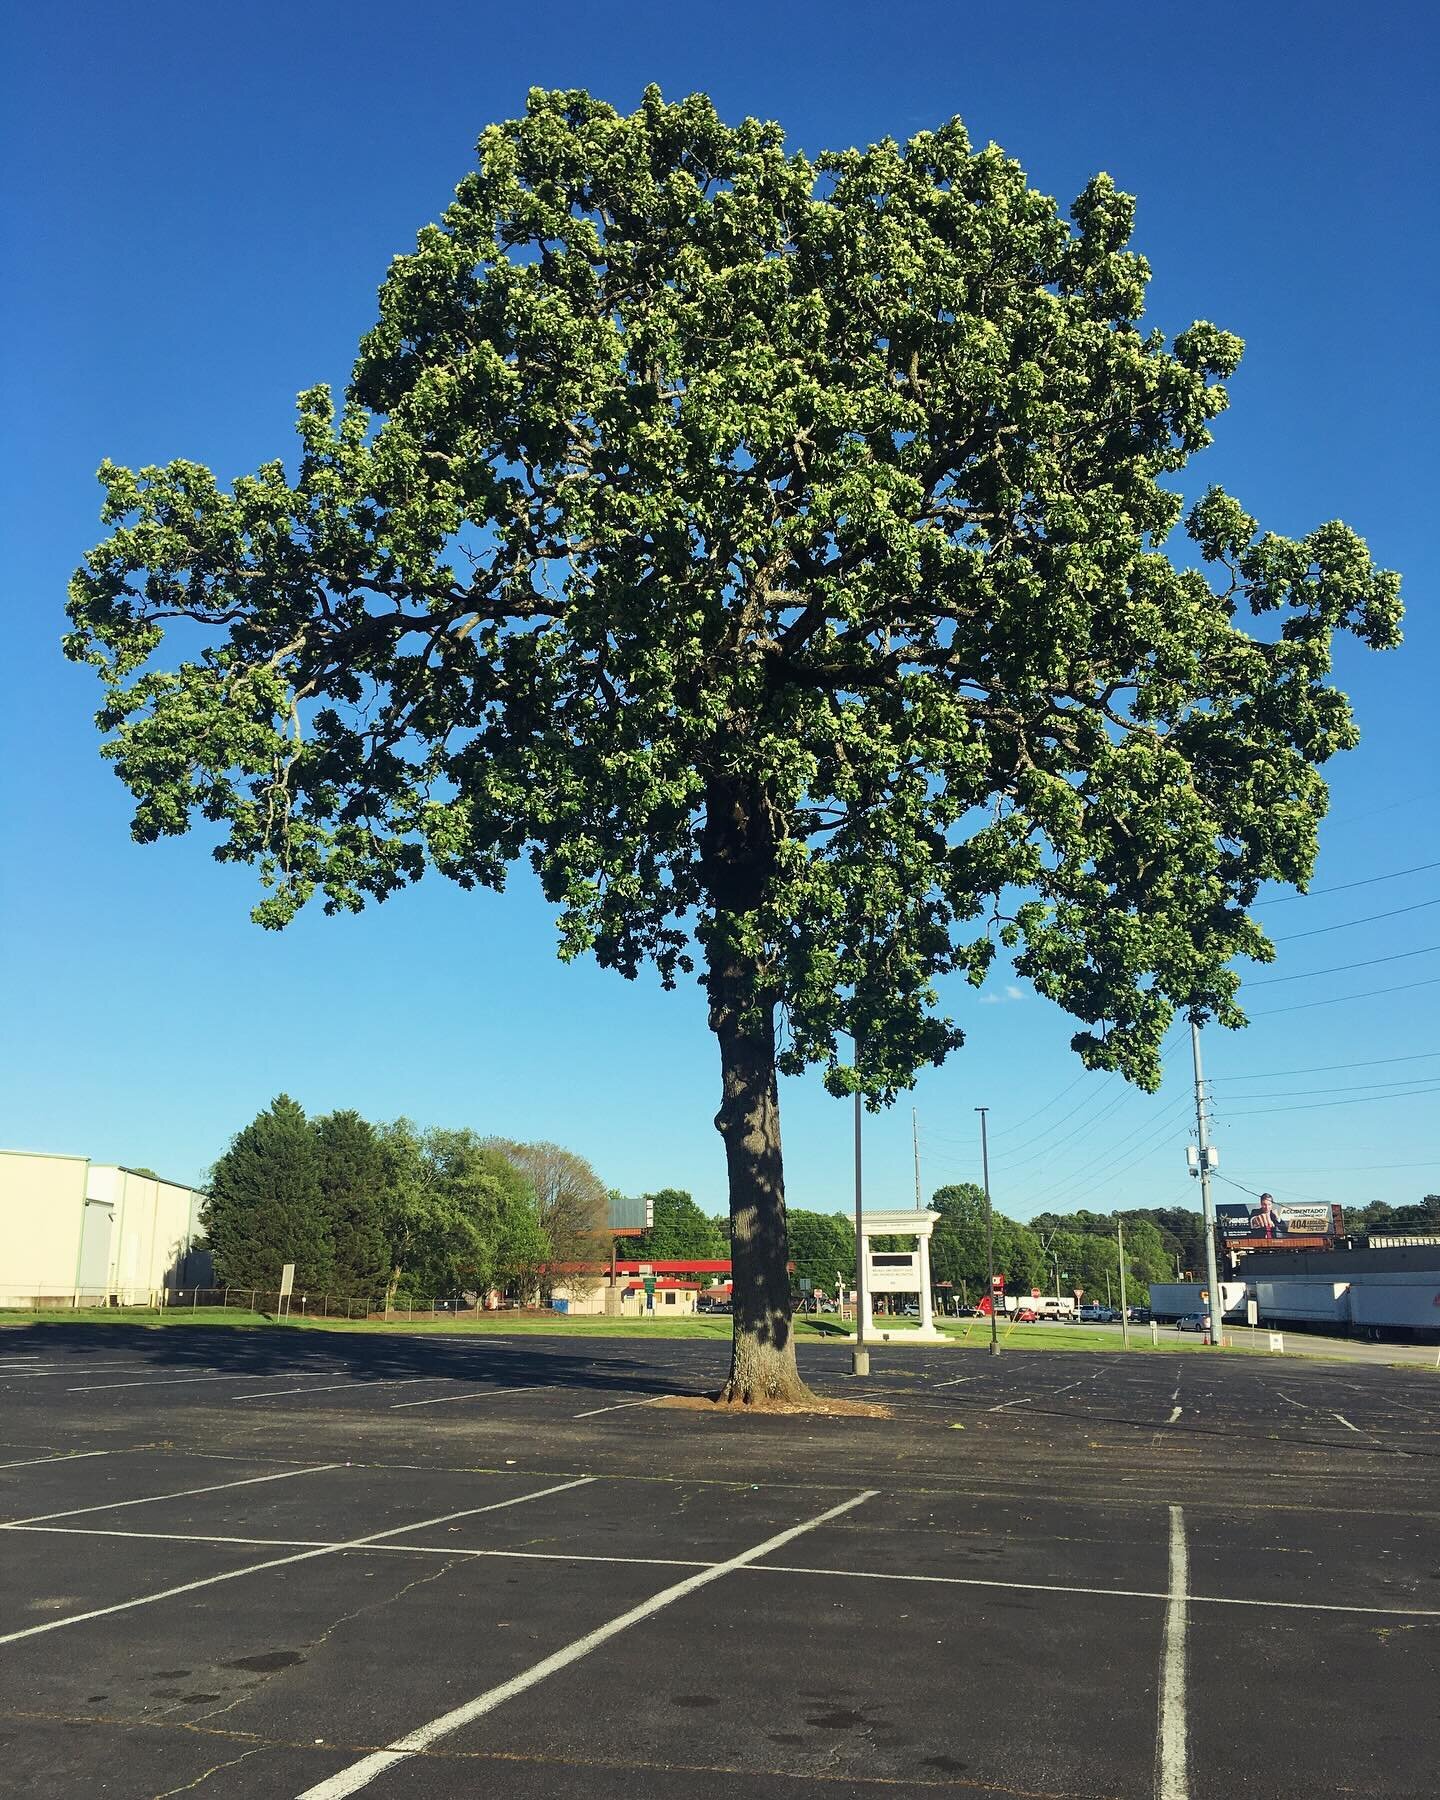 Amidst a sea of unyielding asphalt, a lone tree stands as a testament to nature&rsquo;s persistence. Its roots navigate the earth beneath, reaching for life and offering a glimpse of the resilient beauty that can emerge even in the most urban landsca